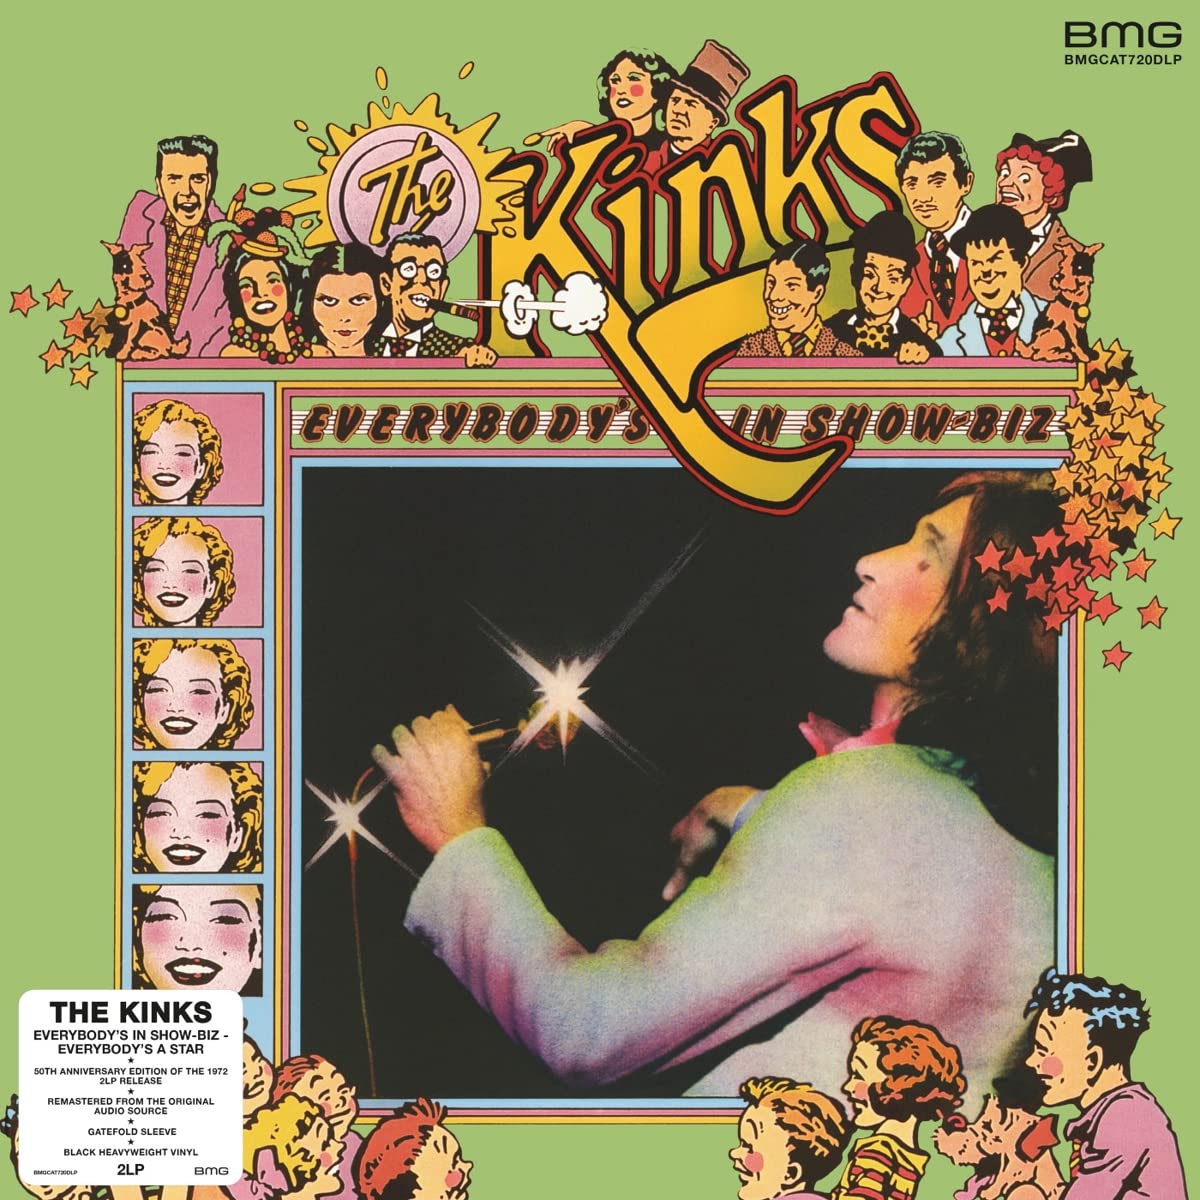 THE KINKS - EVERYBODY'S IN SHOW-BIZ, EVERYBODY'S A STAR - 50TH ANNIVERSARY EDITION - 2-LP - VINYL LP